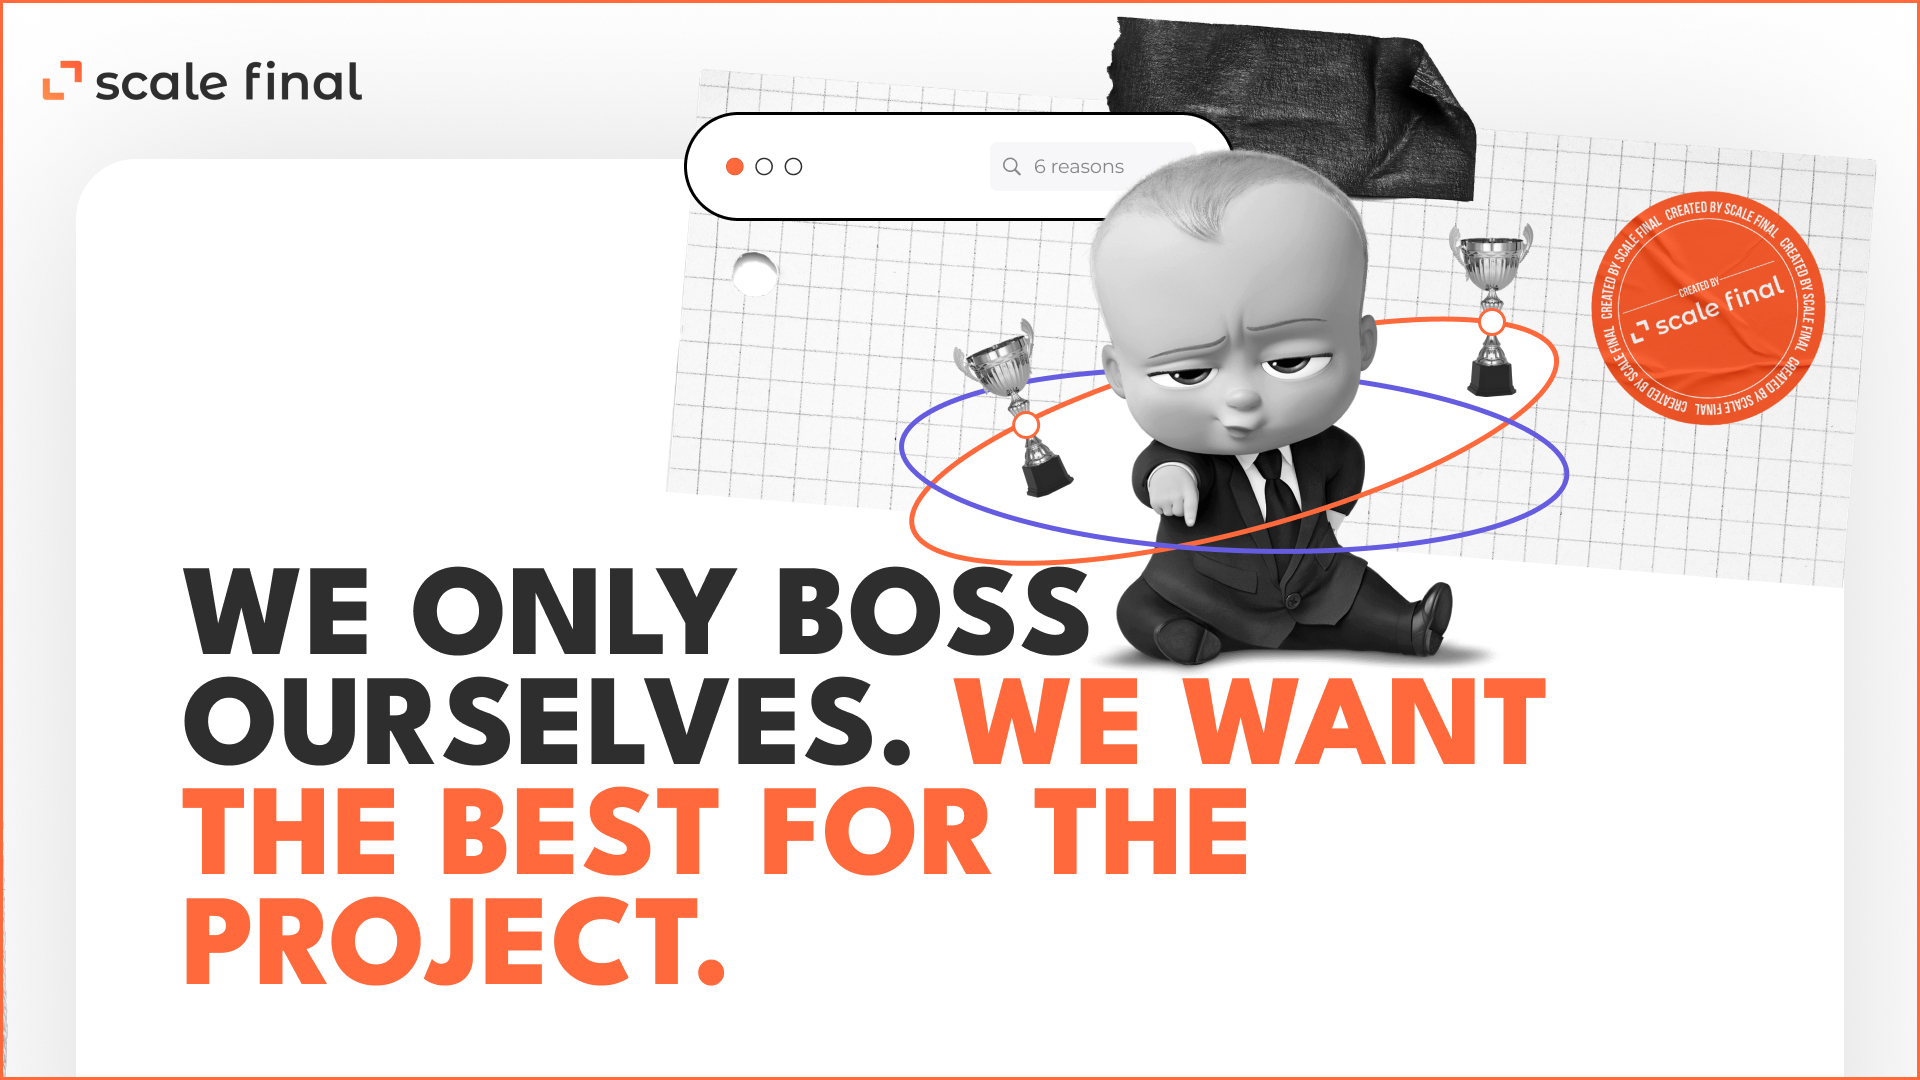 We only boss ourselves around because we want the best for the project.